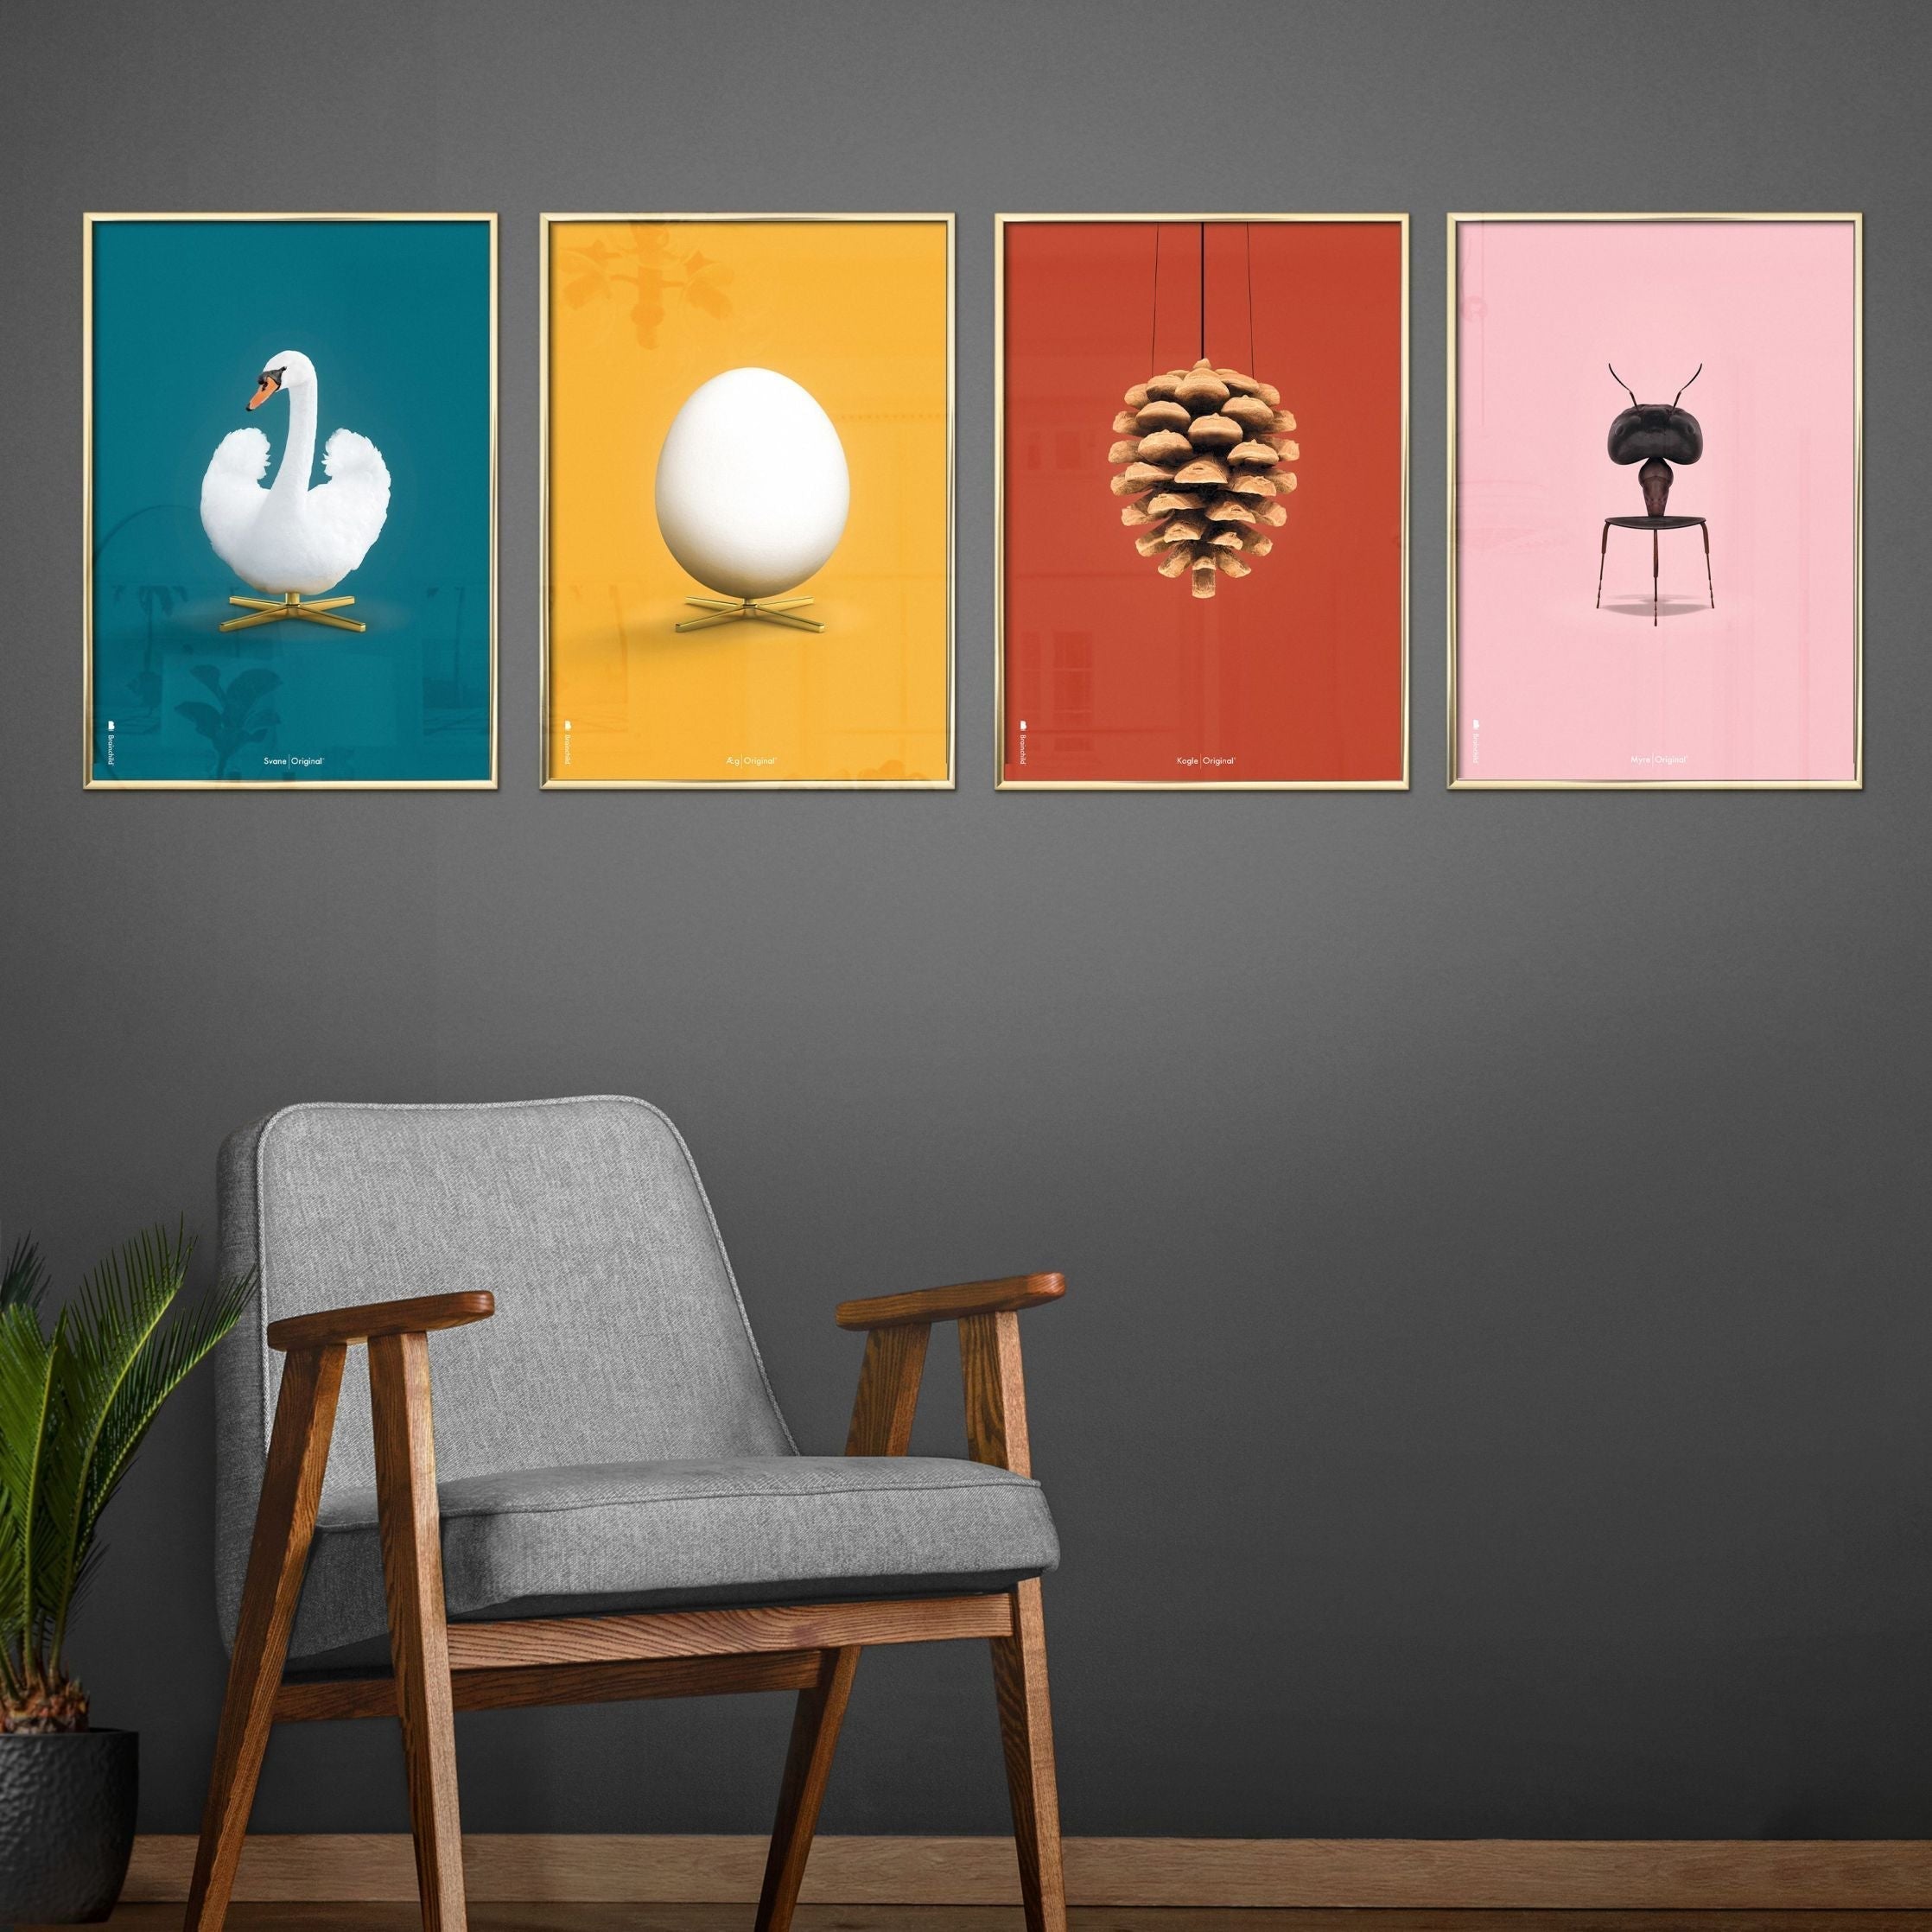 Brainchild Egg Classic Poster, Frame Made Of Light Wood A5, Yellow Background